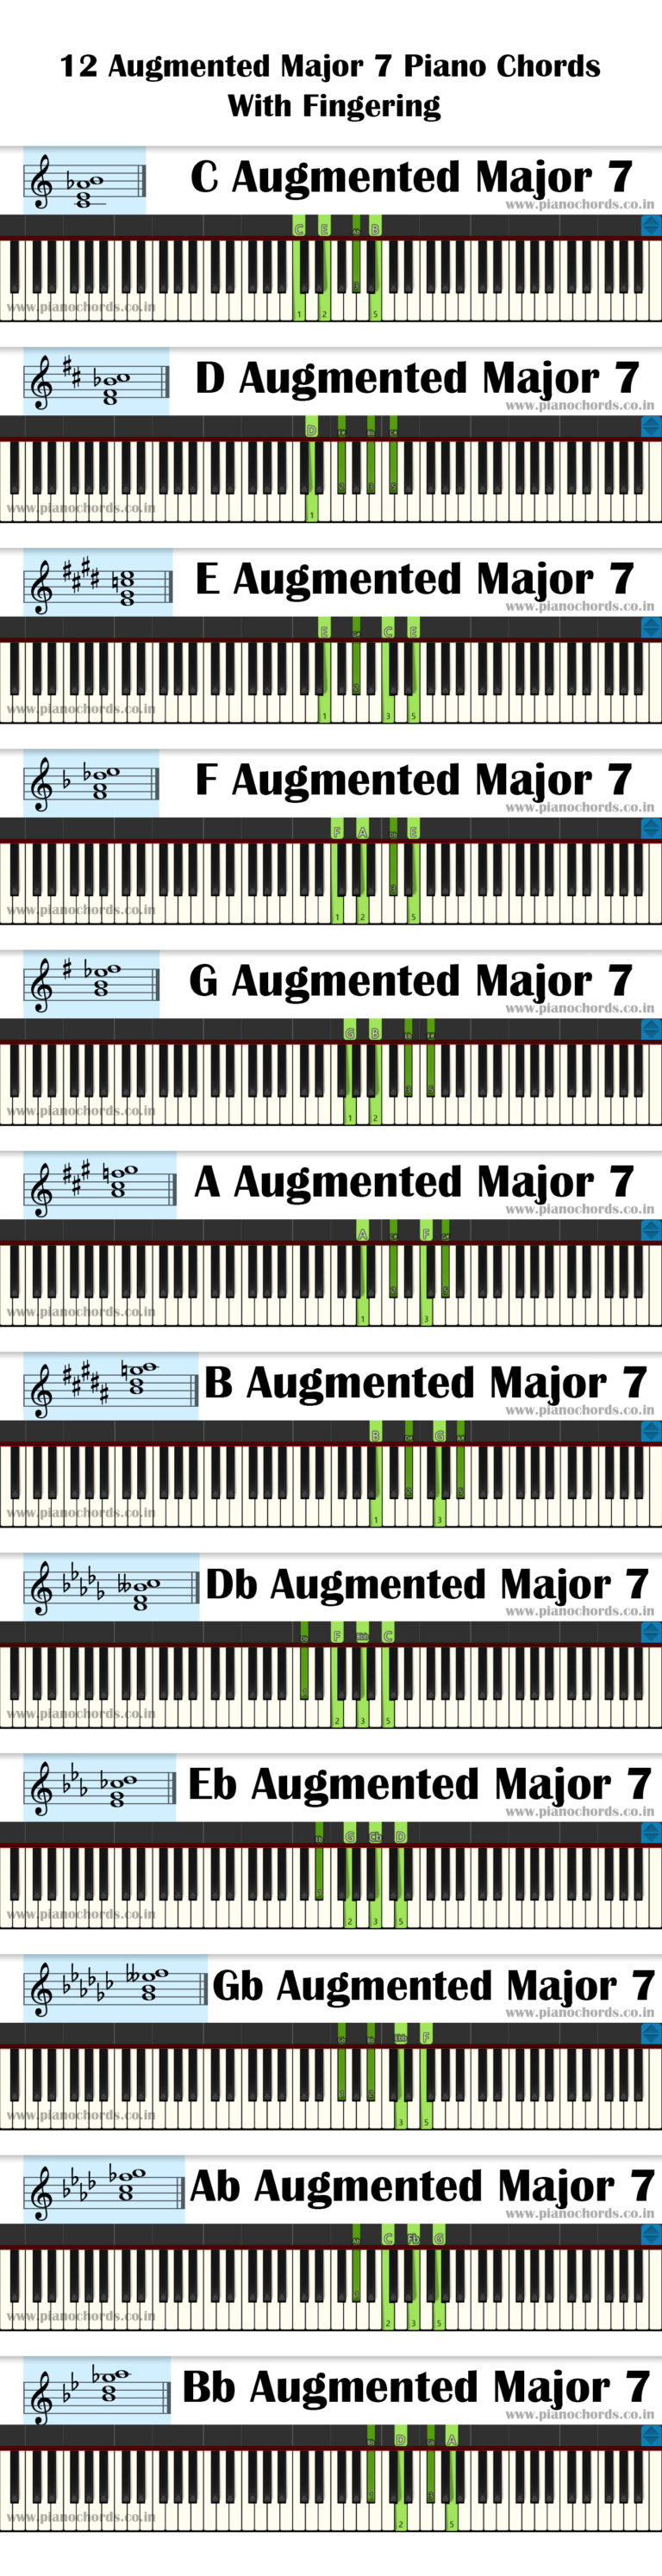 12-major-scales-piano-pdf-aslenergy